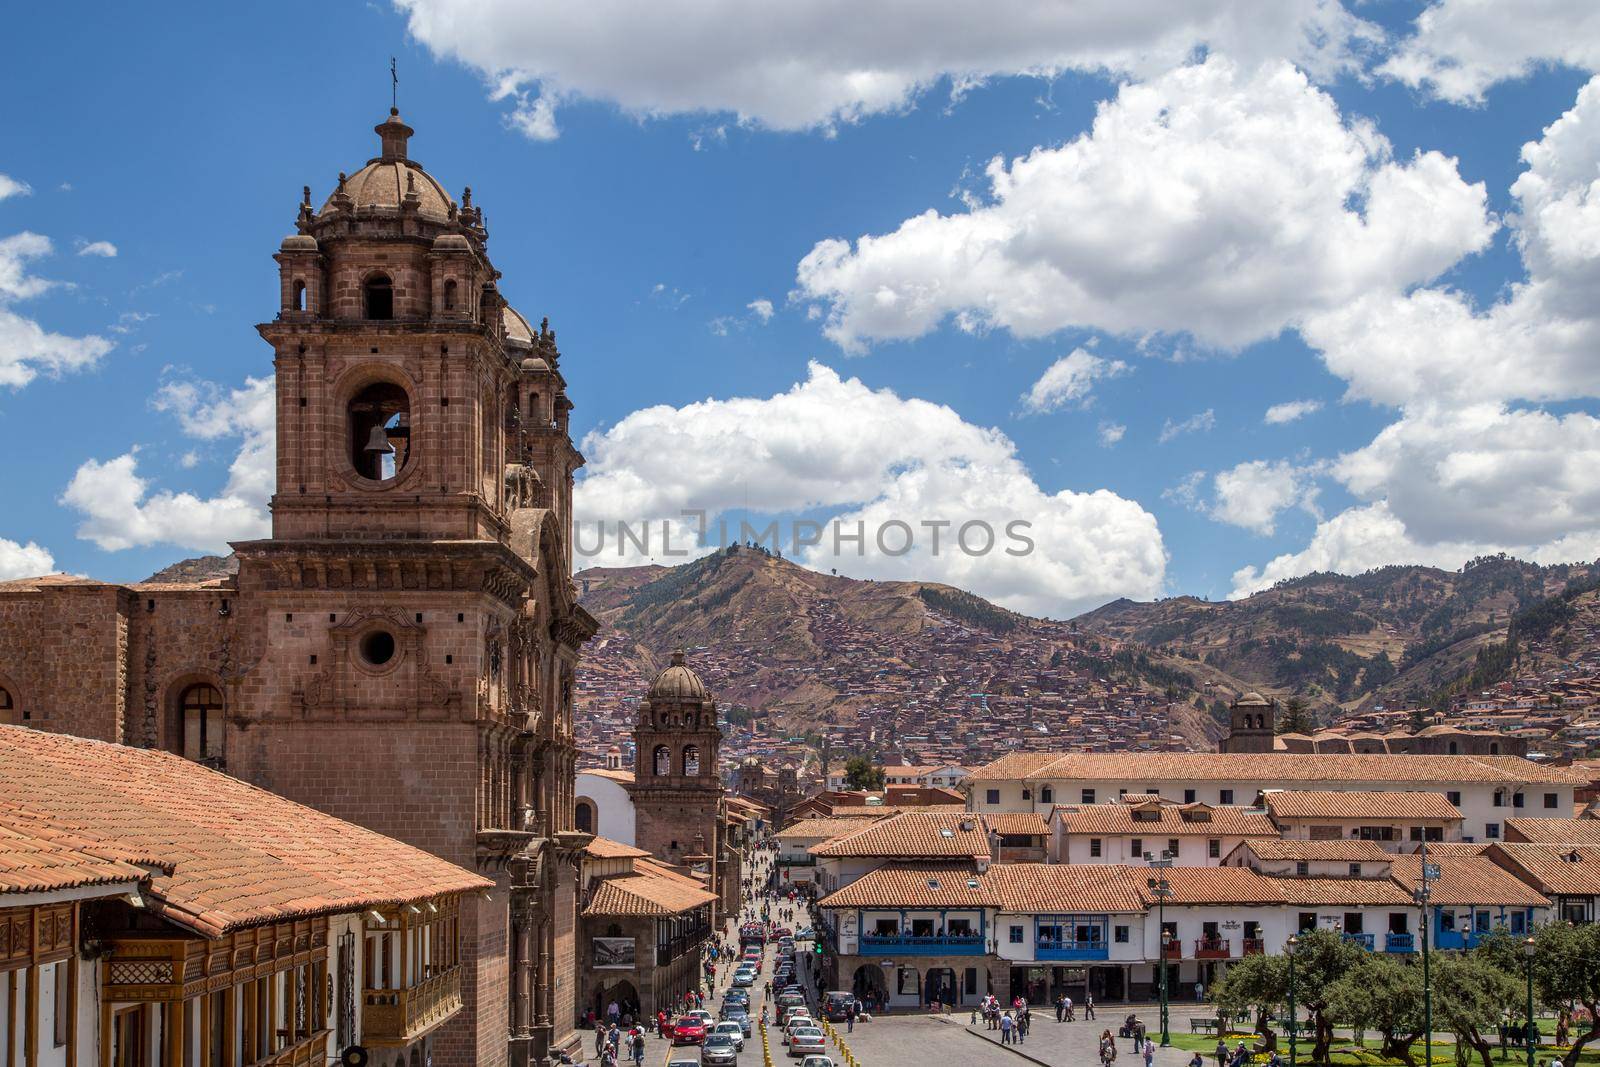 Cusco, Peru - October 06, 2015: The Catholic Church at the main plaza in the historic city centre